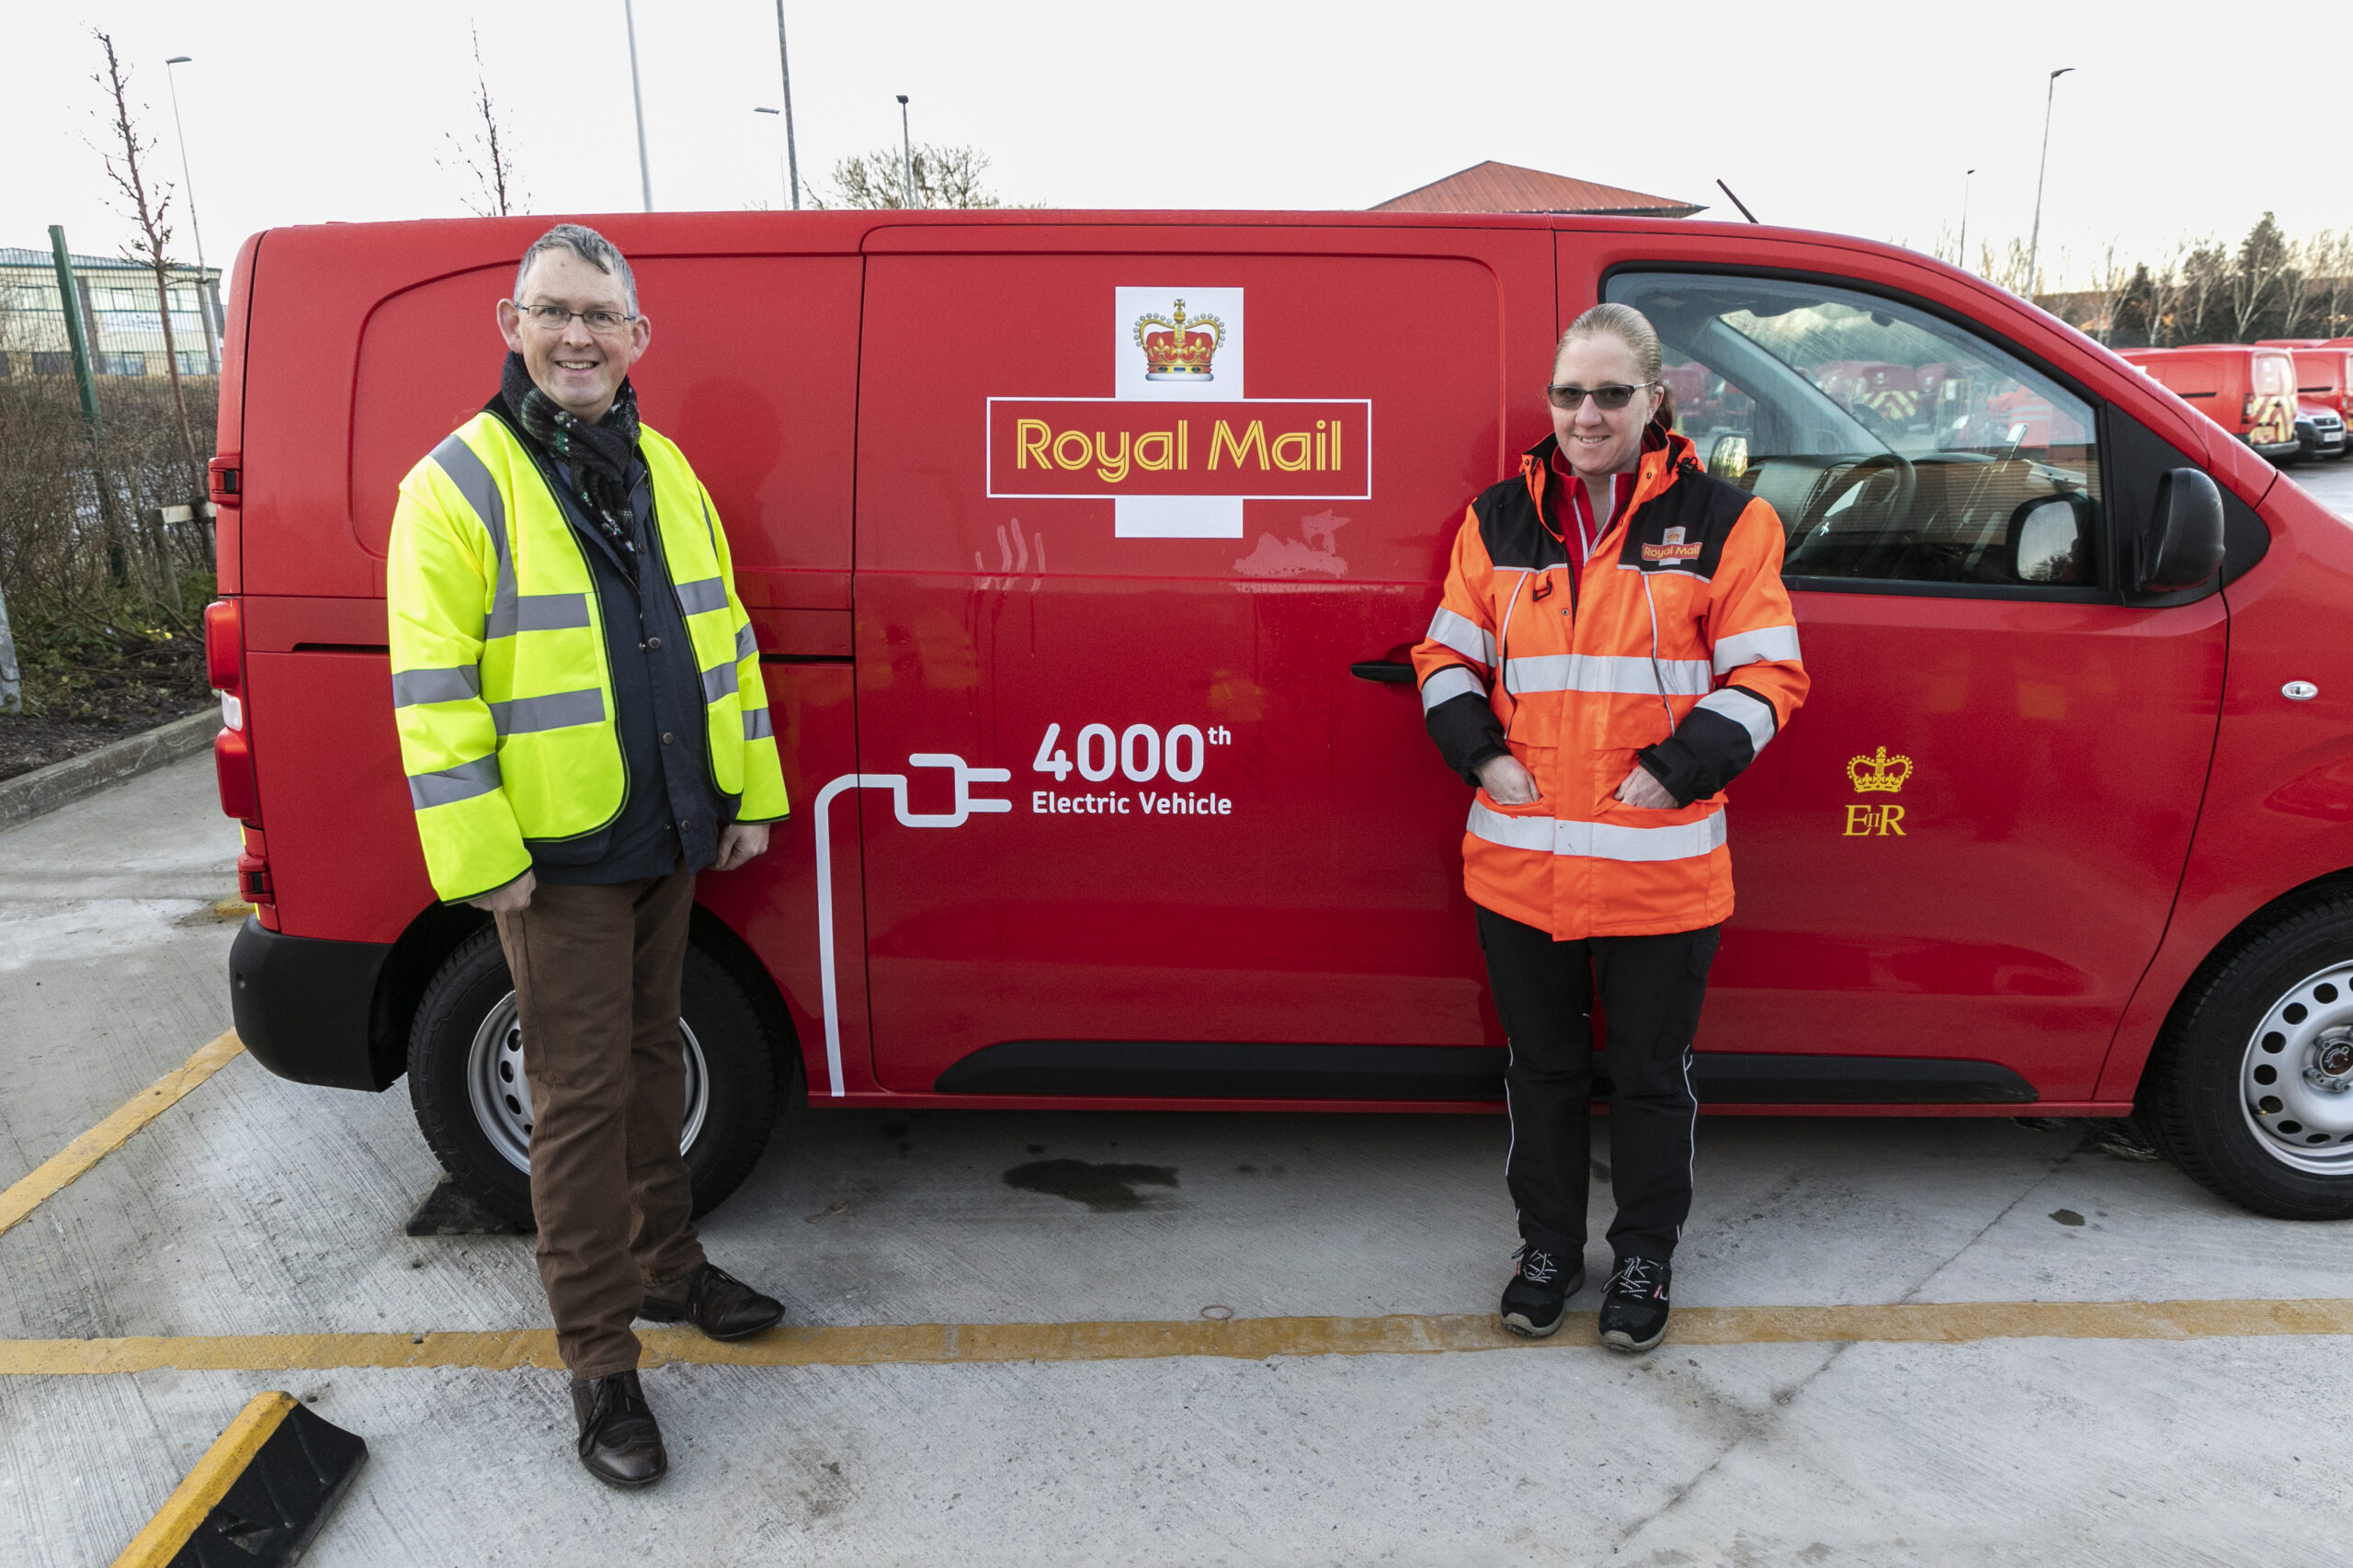 Royal Mail passes 4,000 electric vehicles milestone as its restarts international services